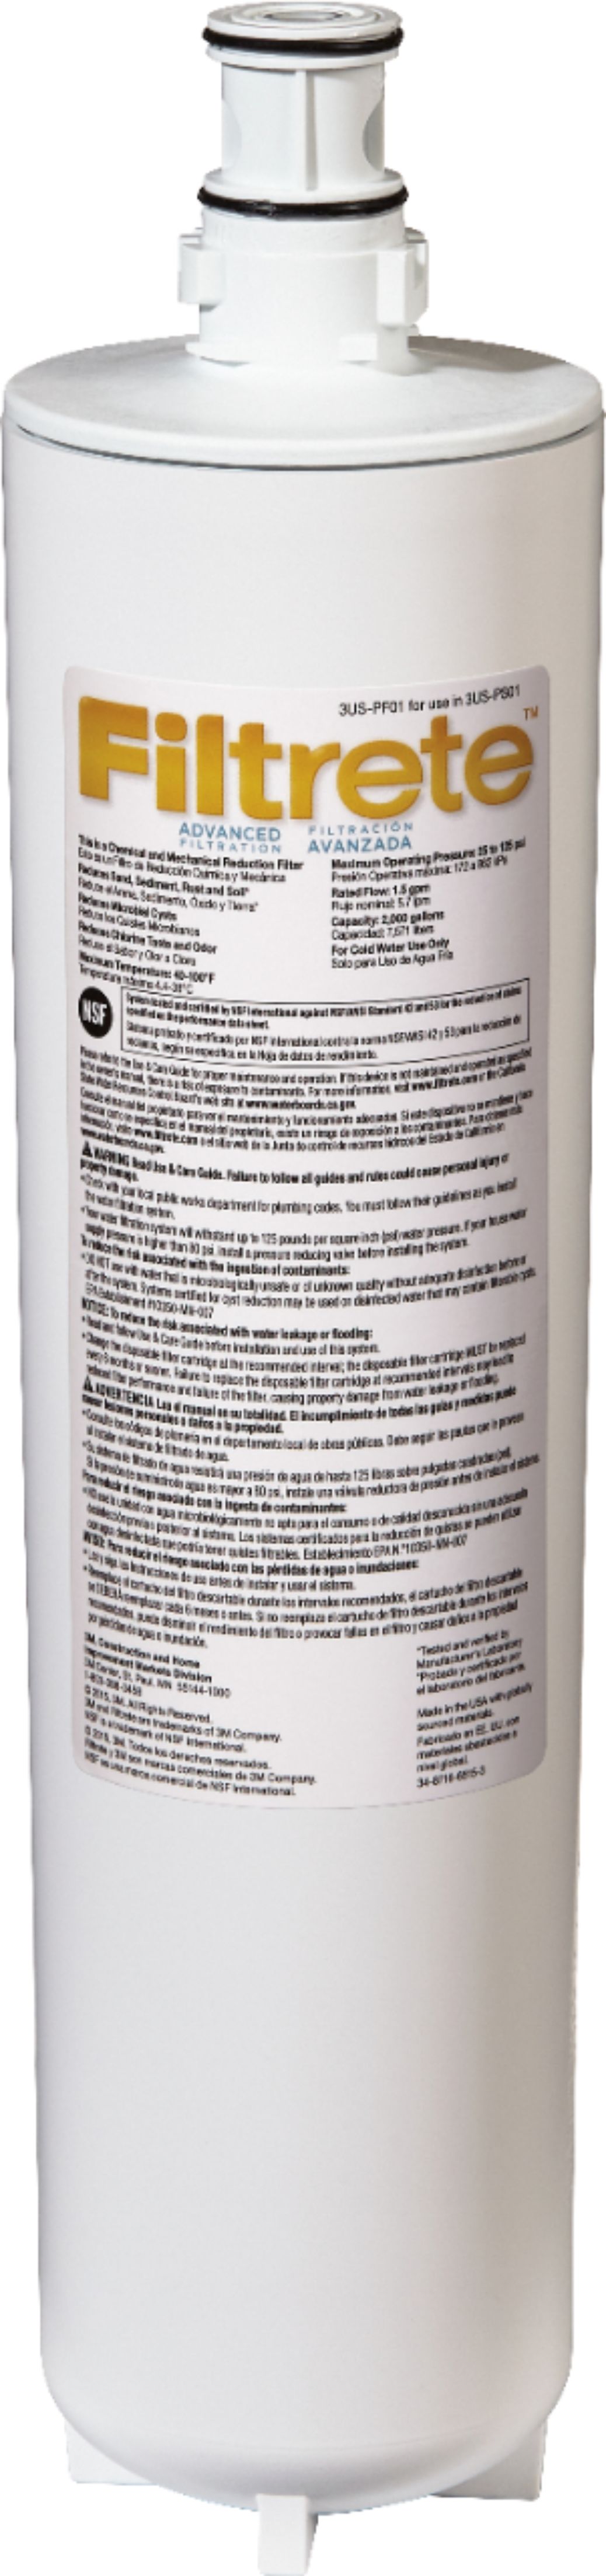 Filtrete - Advanced Under Sink Quick Change Water Filtration Filter 3US-PF01 for use with 3US-PS01 System - White